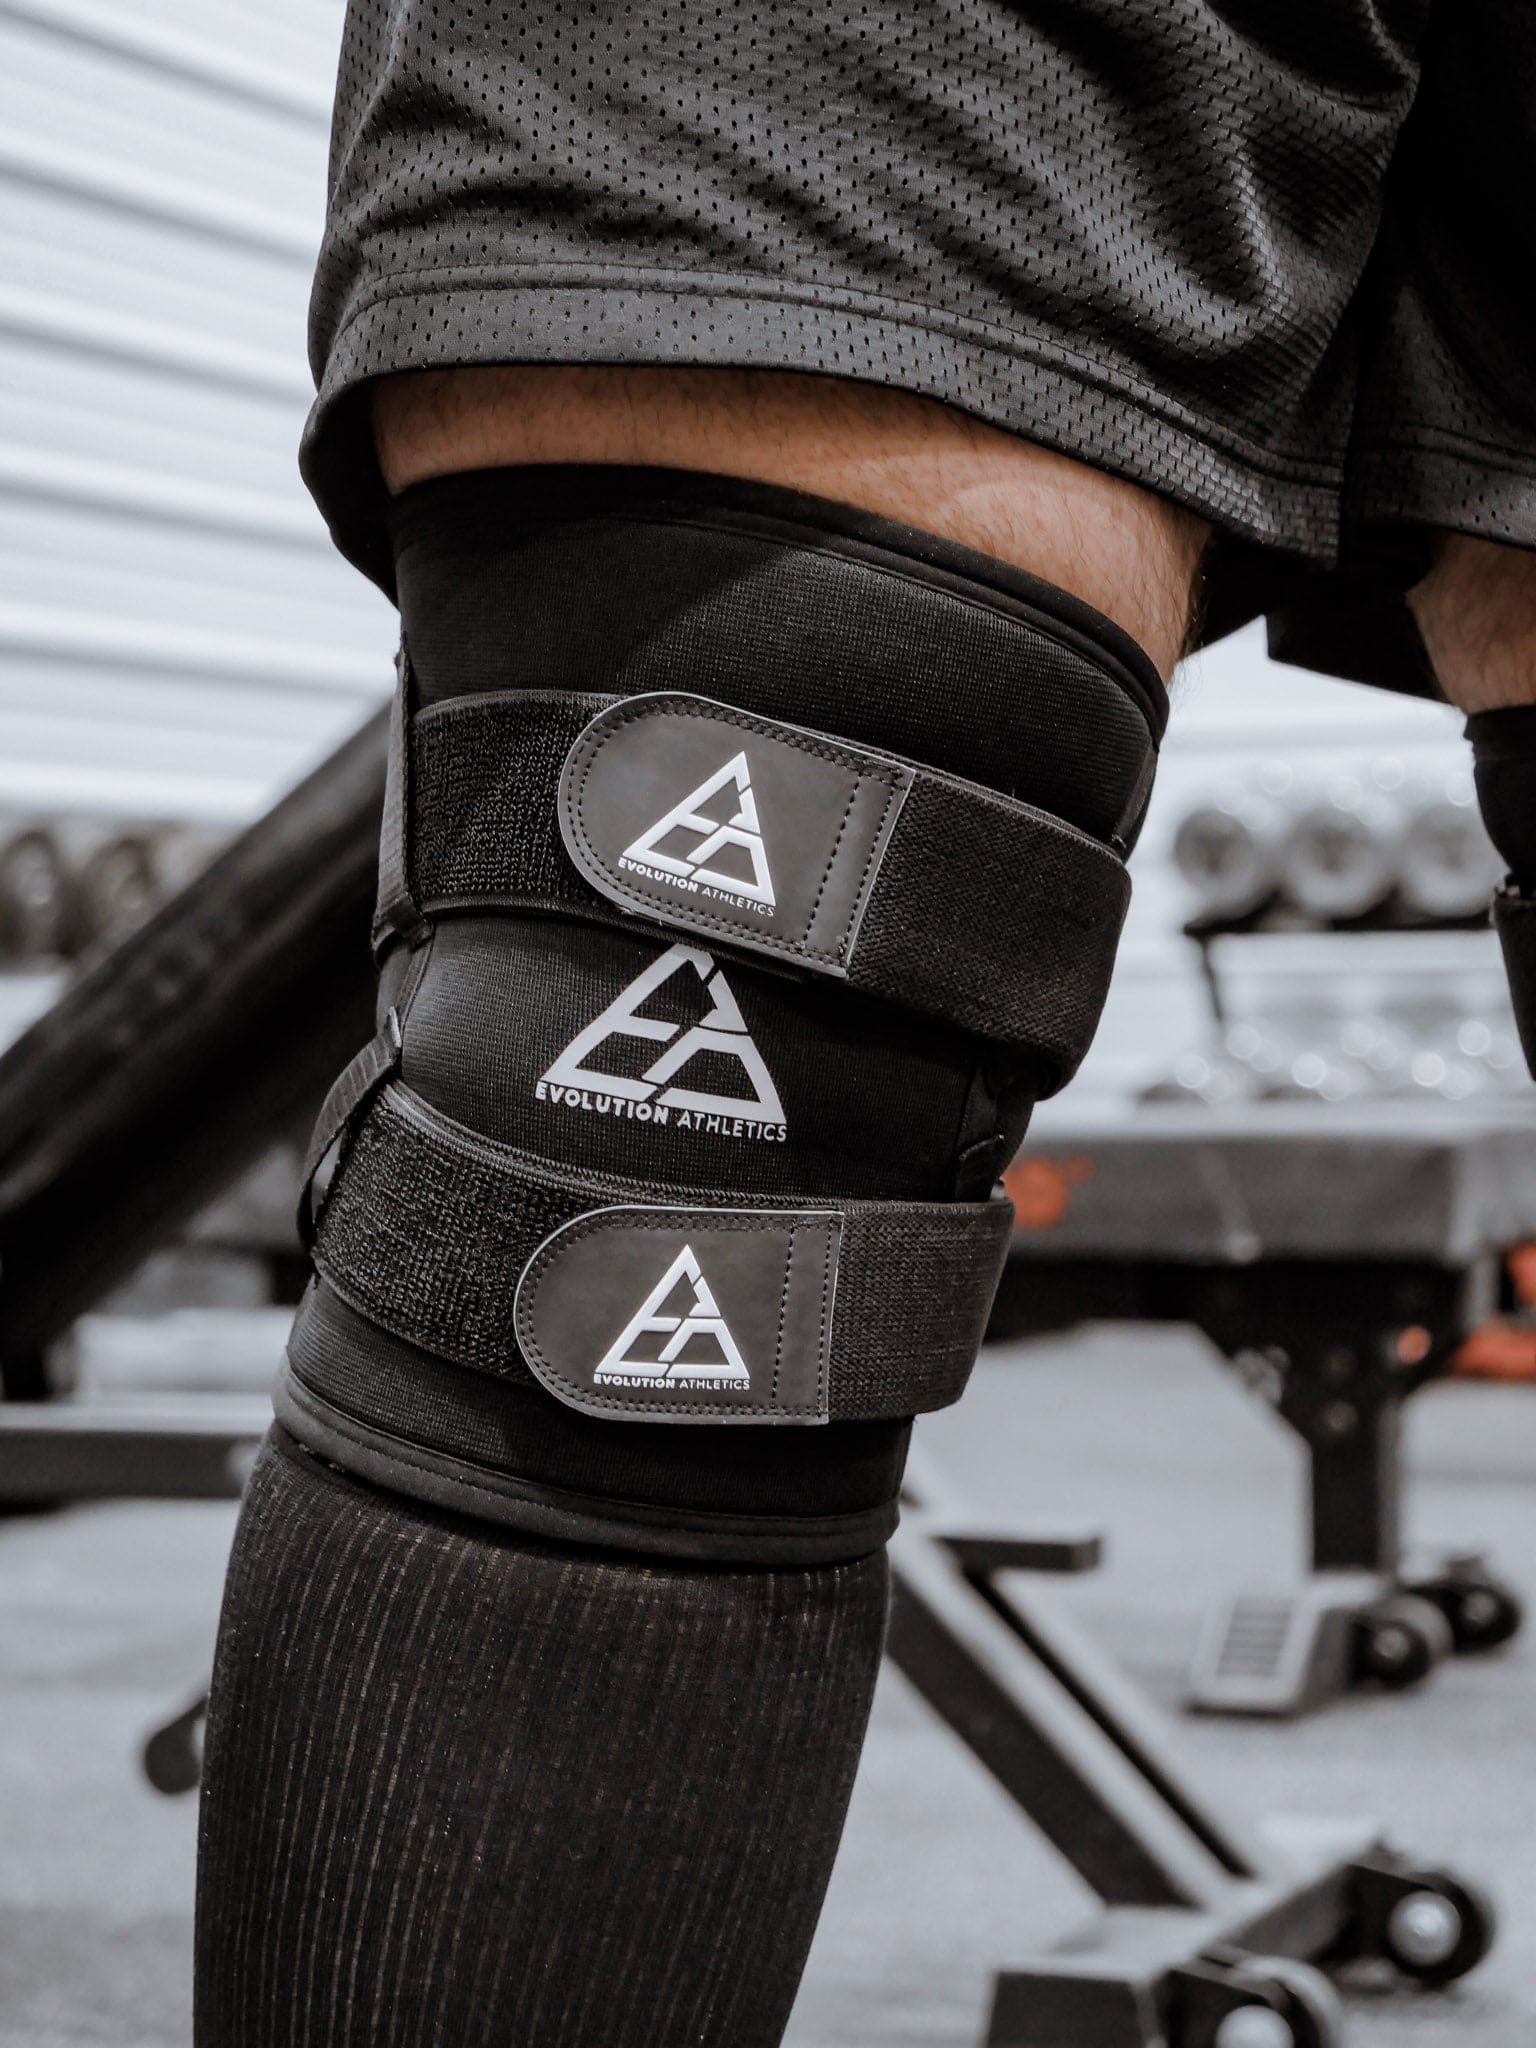 Beast Gear - We've improved on ordinary knee sleeves with our Tech